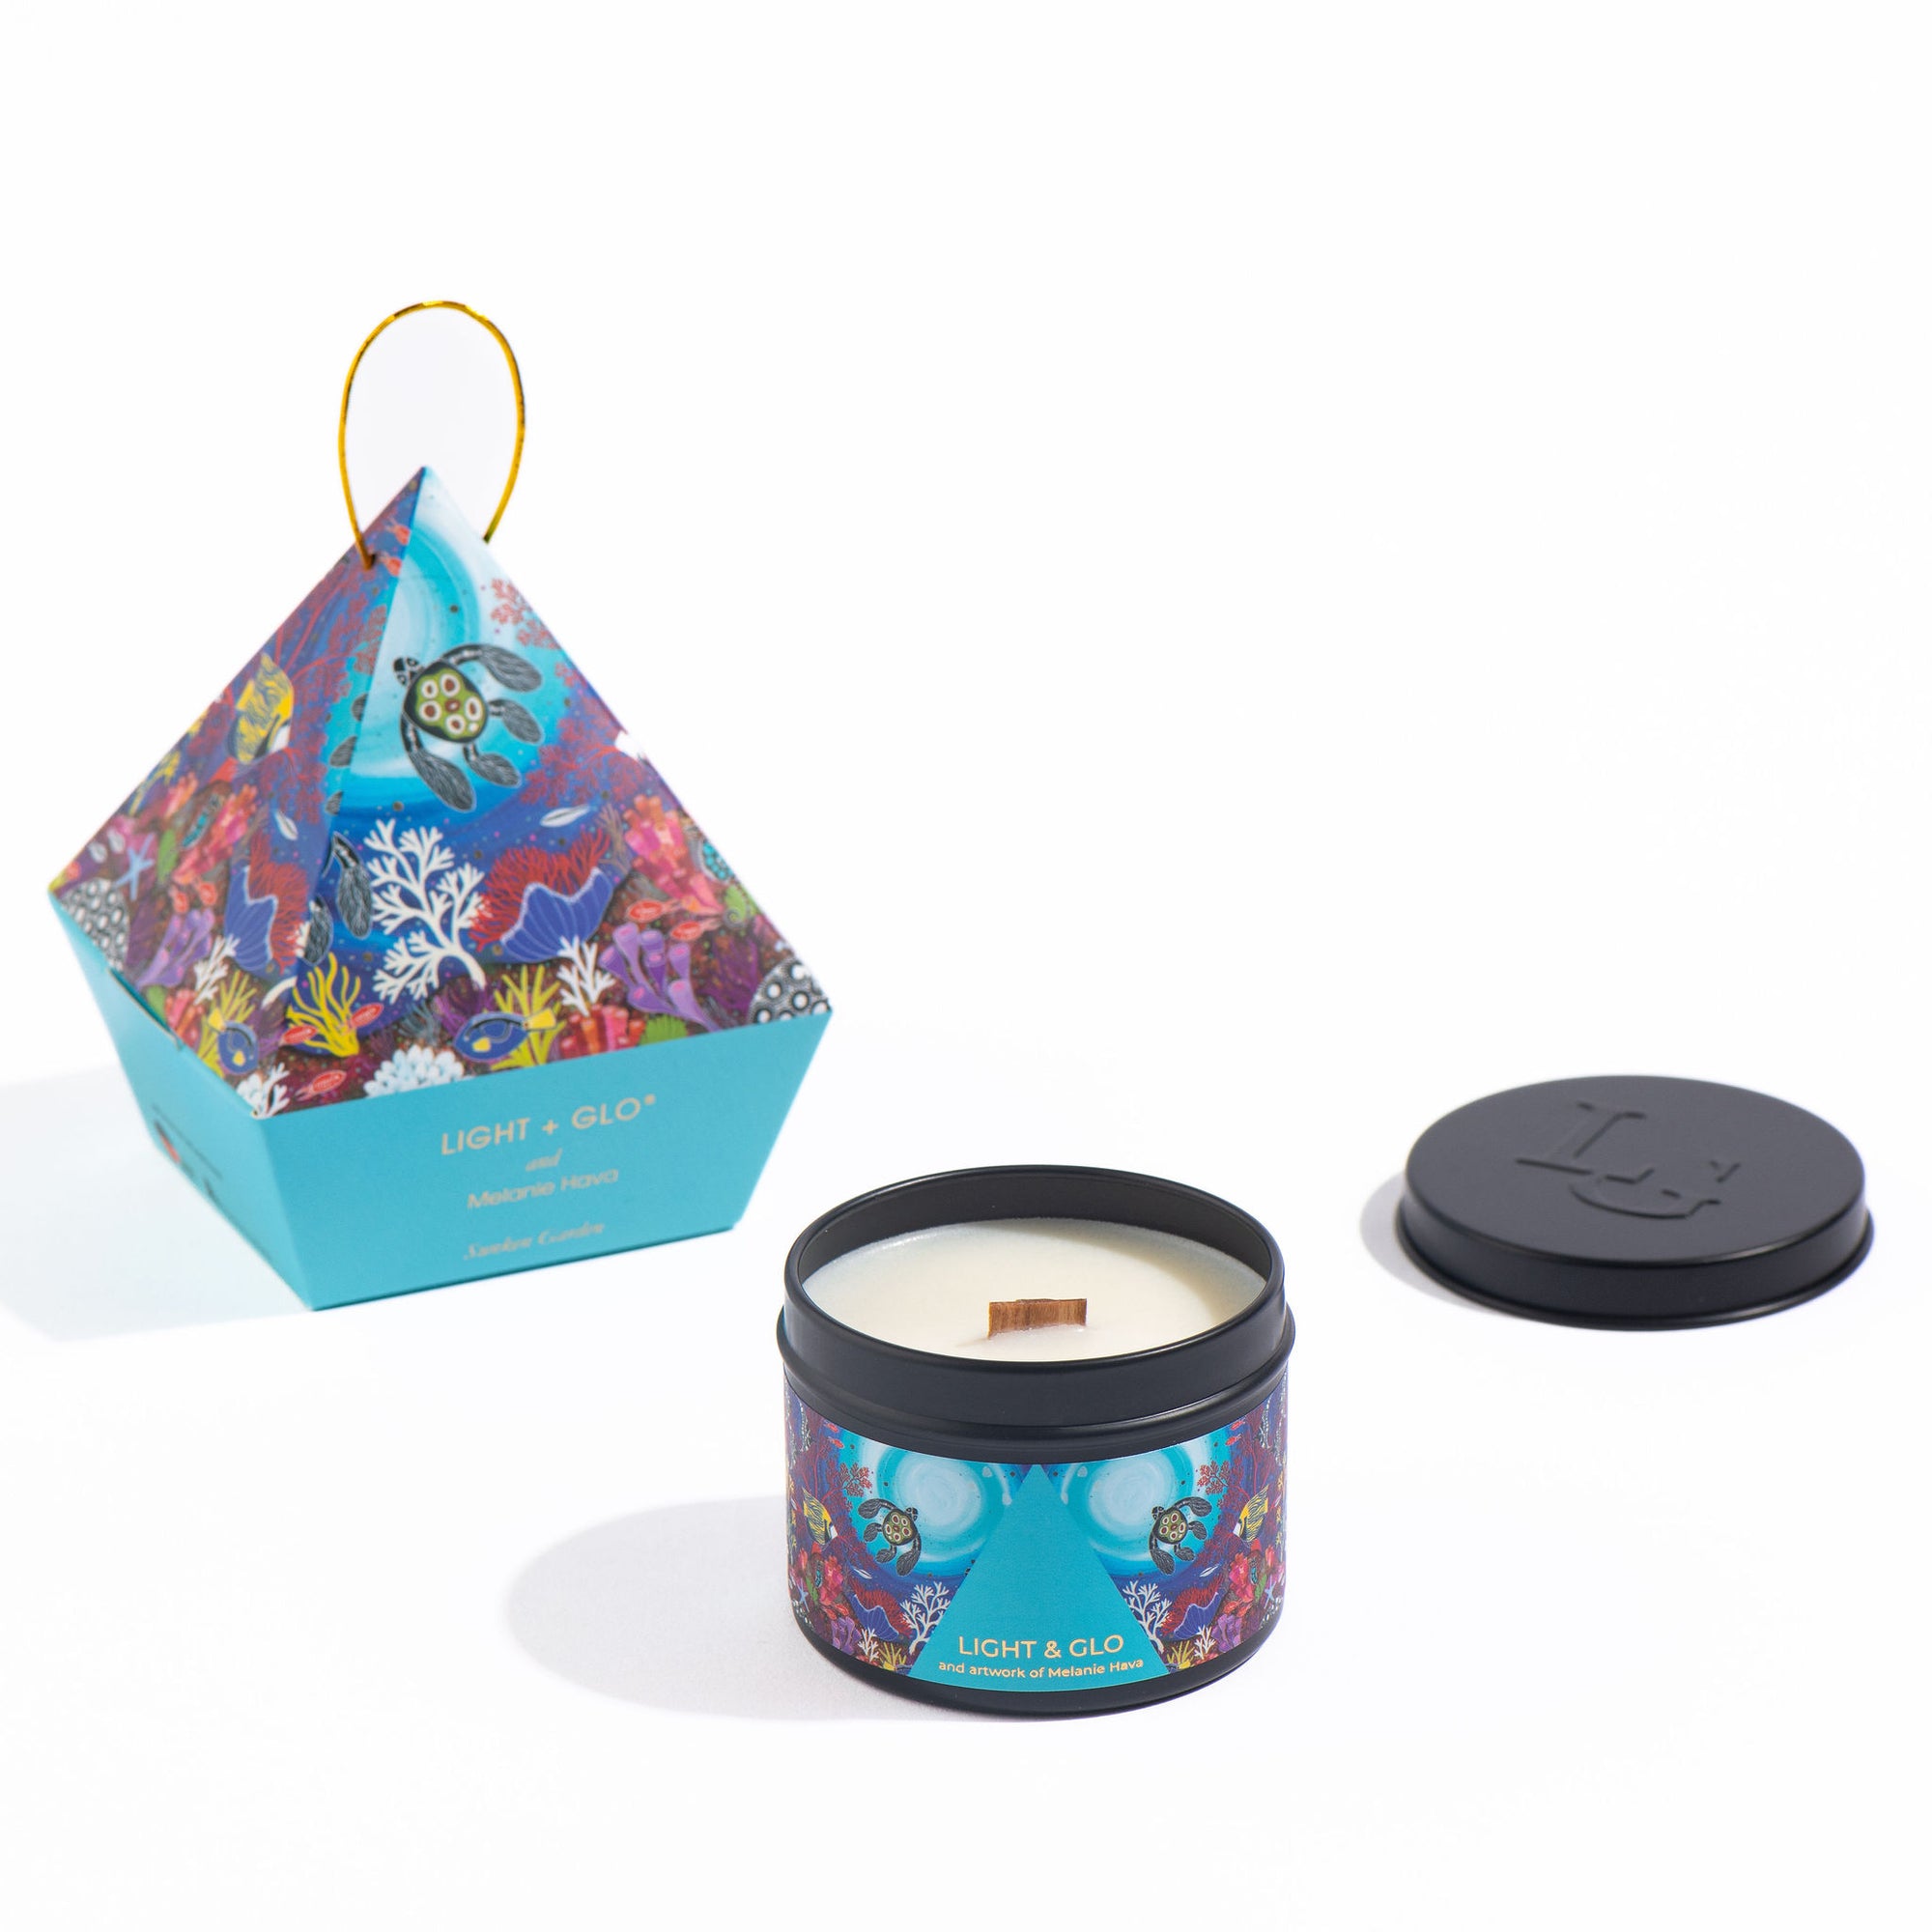 Soul Australiana Travel Candle - Sunken Garden Bauble Limited Edition Candle | Luxury Candles & Home Fragrances by Light + Glo